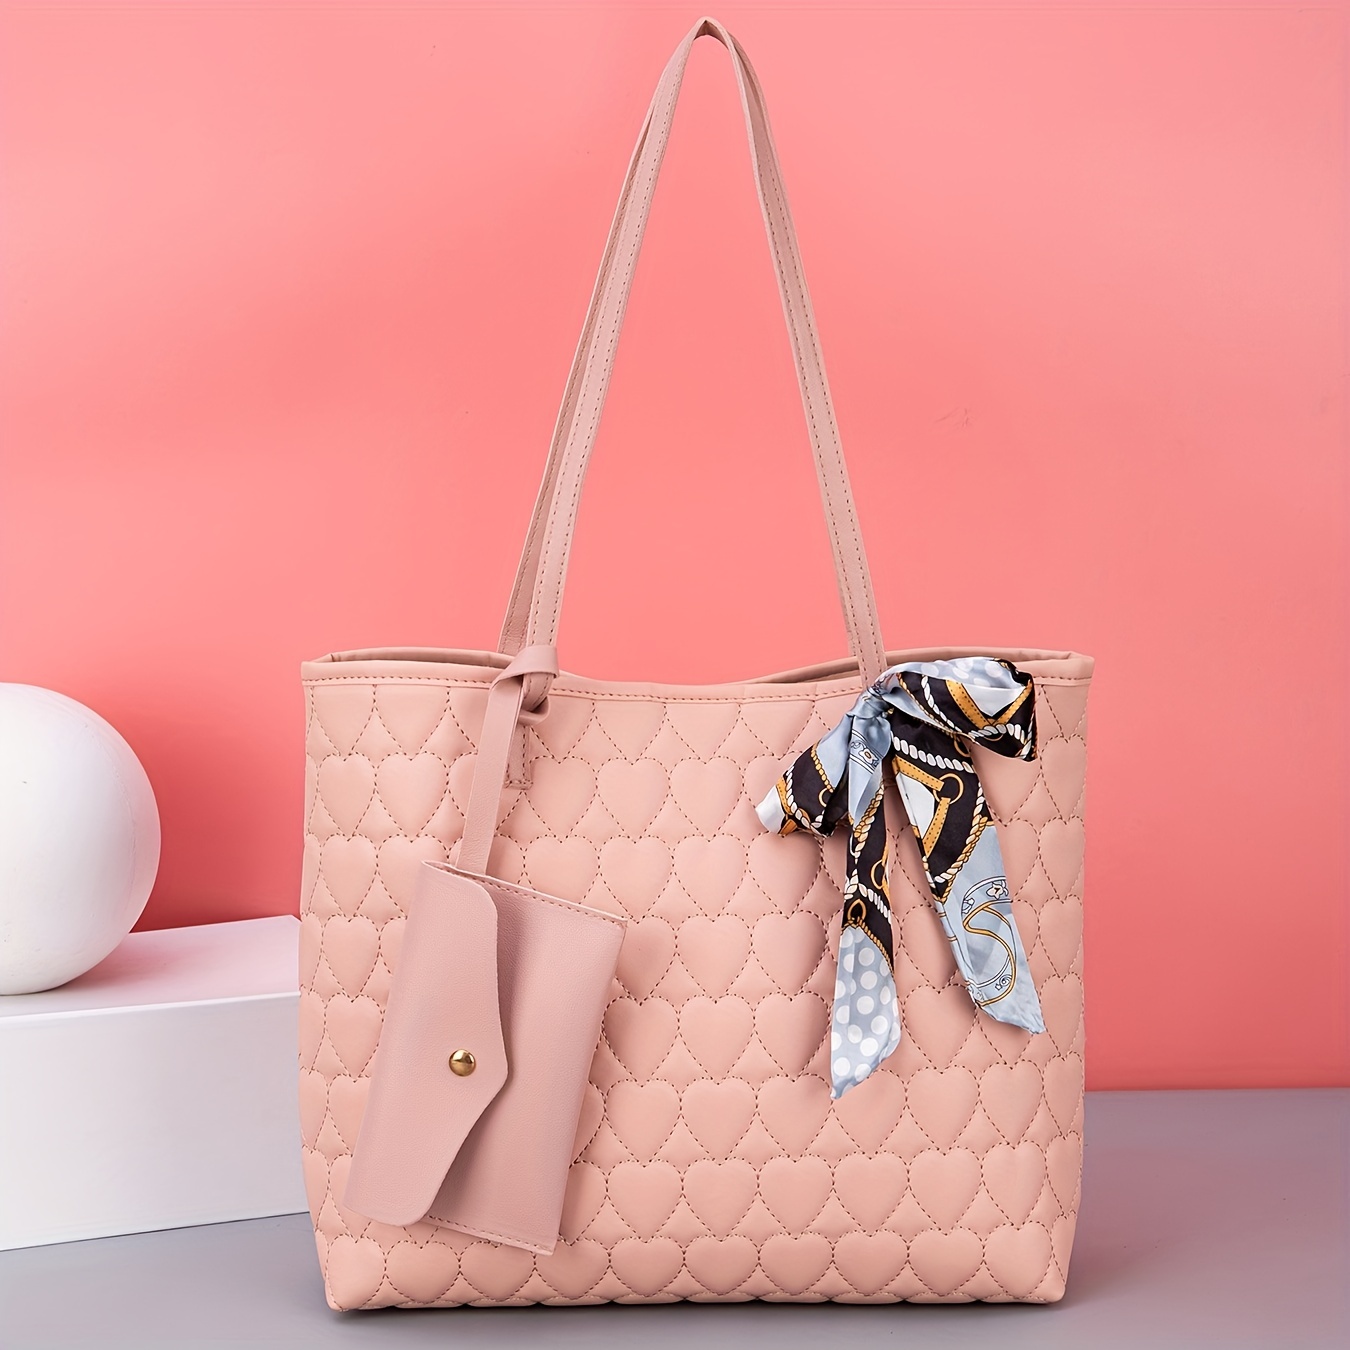 Fashion Tote Bag Outdoor Womens Shopping Bag Patchwork Color Design Classic  Letter Logo GM Large Shopping Handbag From Mikih, $55.53